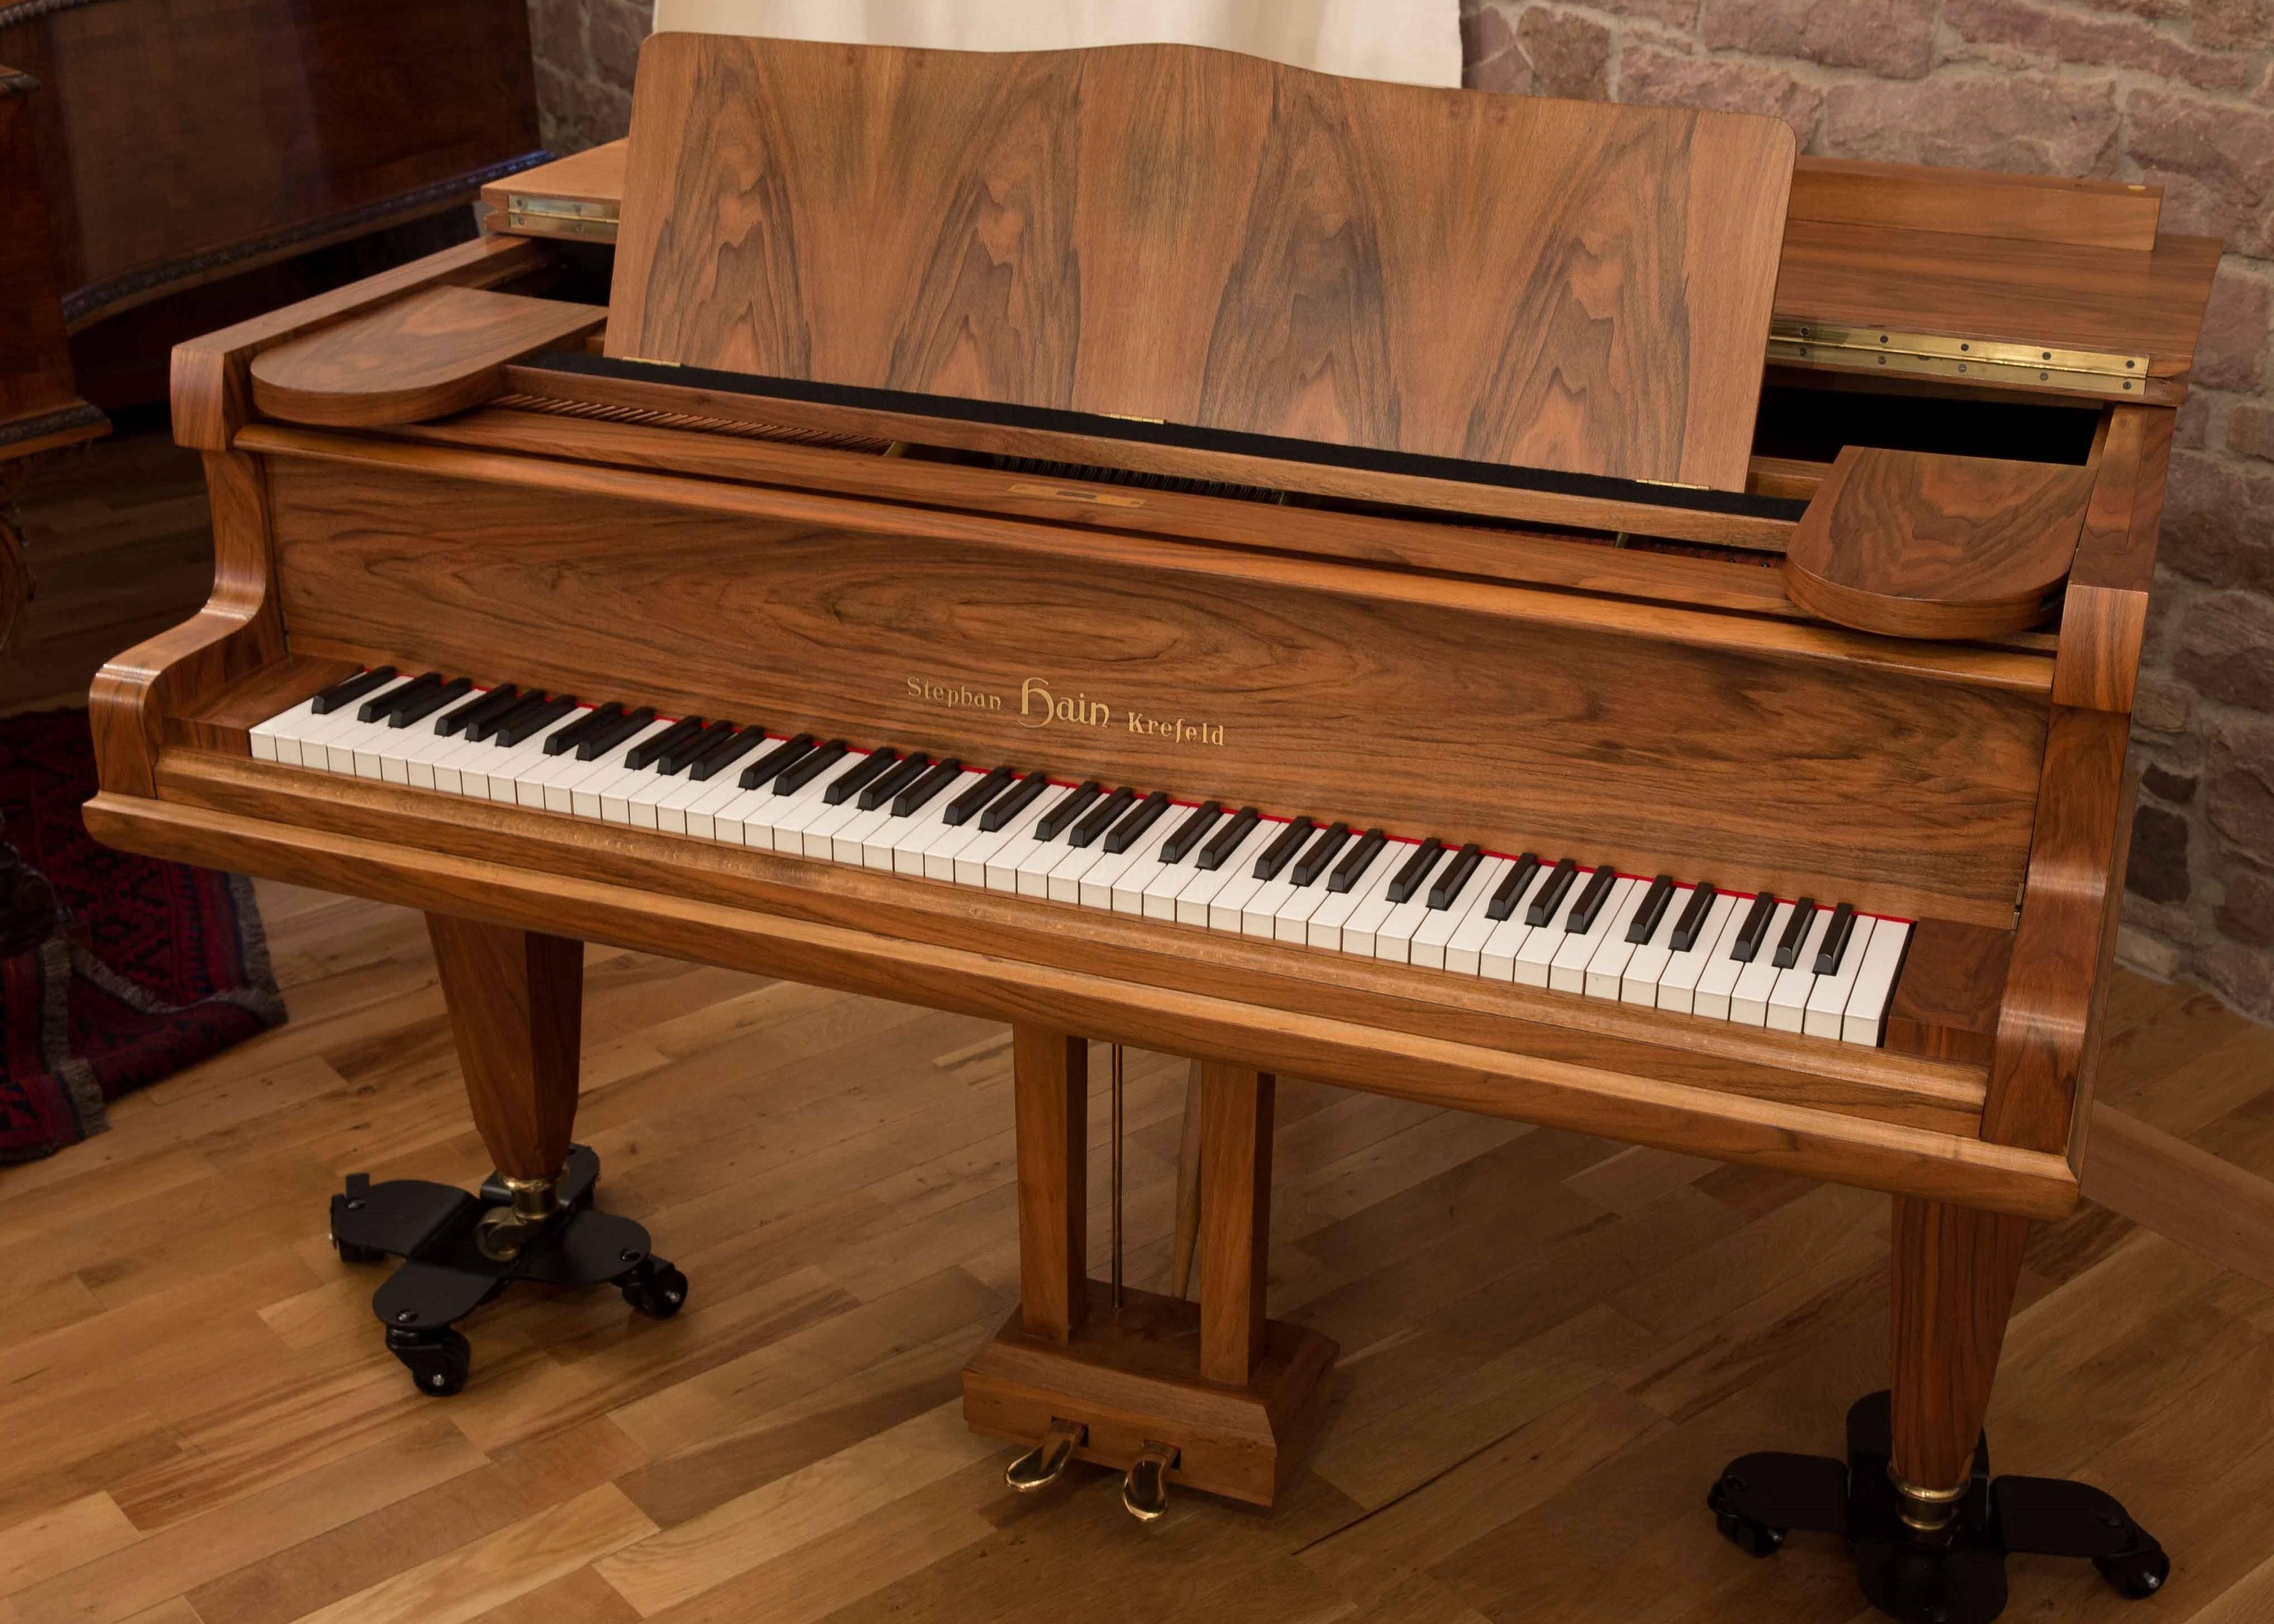 German baby Grand Piano by Stephan Hain, Krefeld, manufactured 1964. 88 keys, synthetic white key covers, ebony black keys. It has straight tapered legs and a walnut case in a perfect satin finish. Fully original and rare to find, a Mid-Century